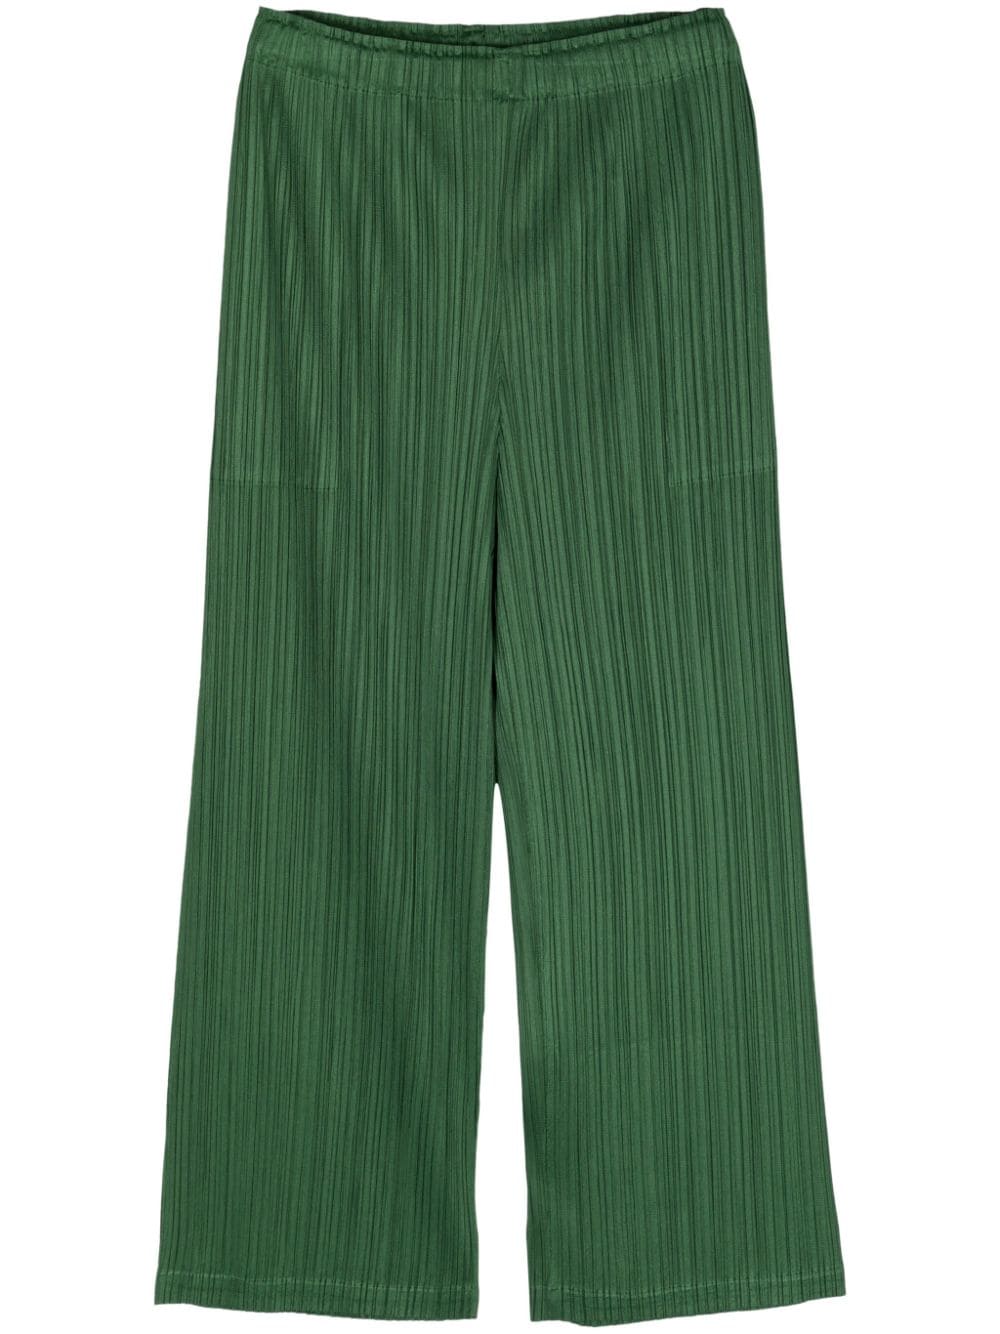 Pleats Please Issey Miyake March pleated wide-leg trousers - Green von Pleats Please Issey Miyake